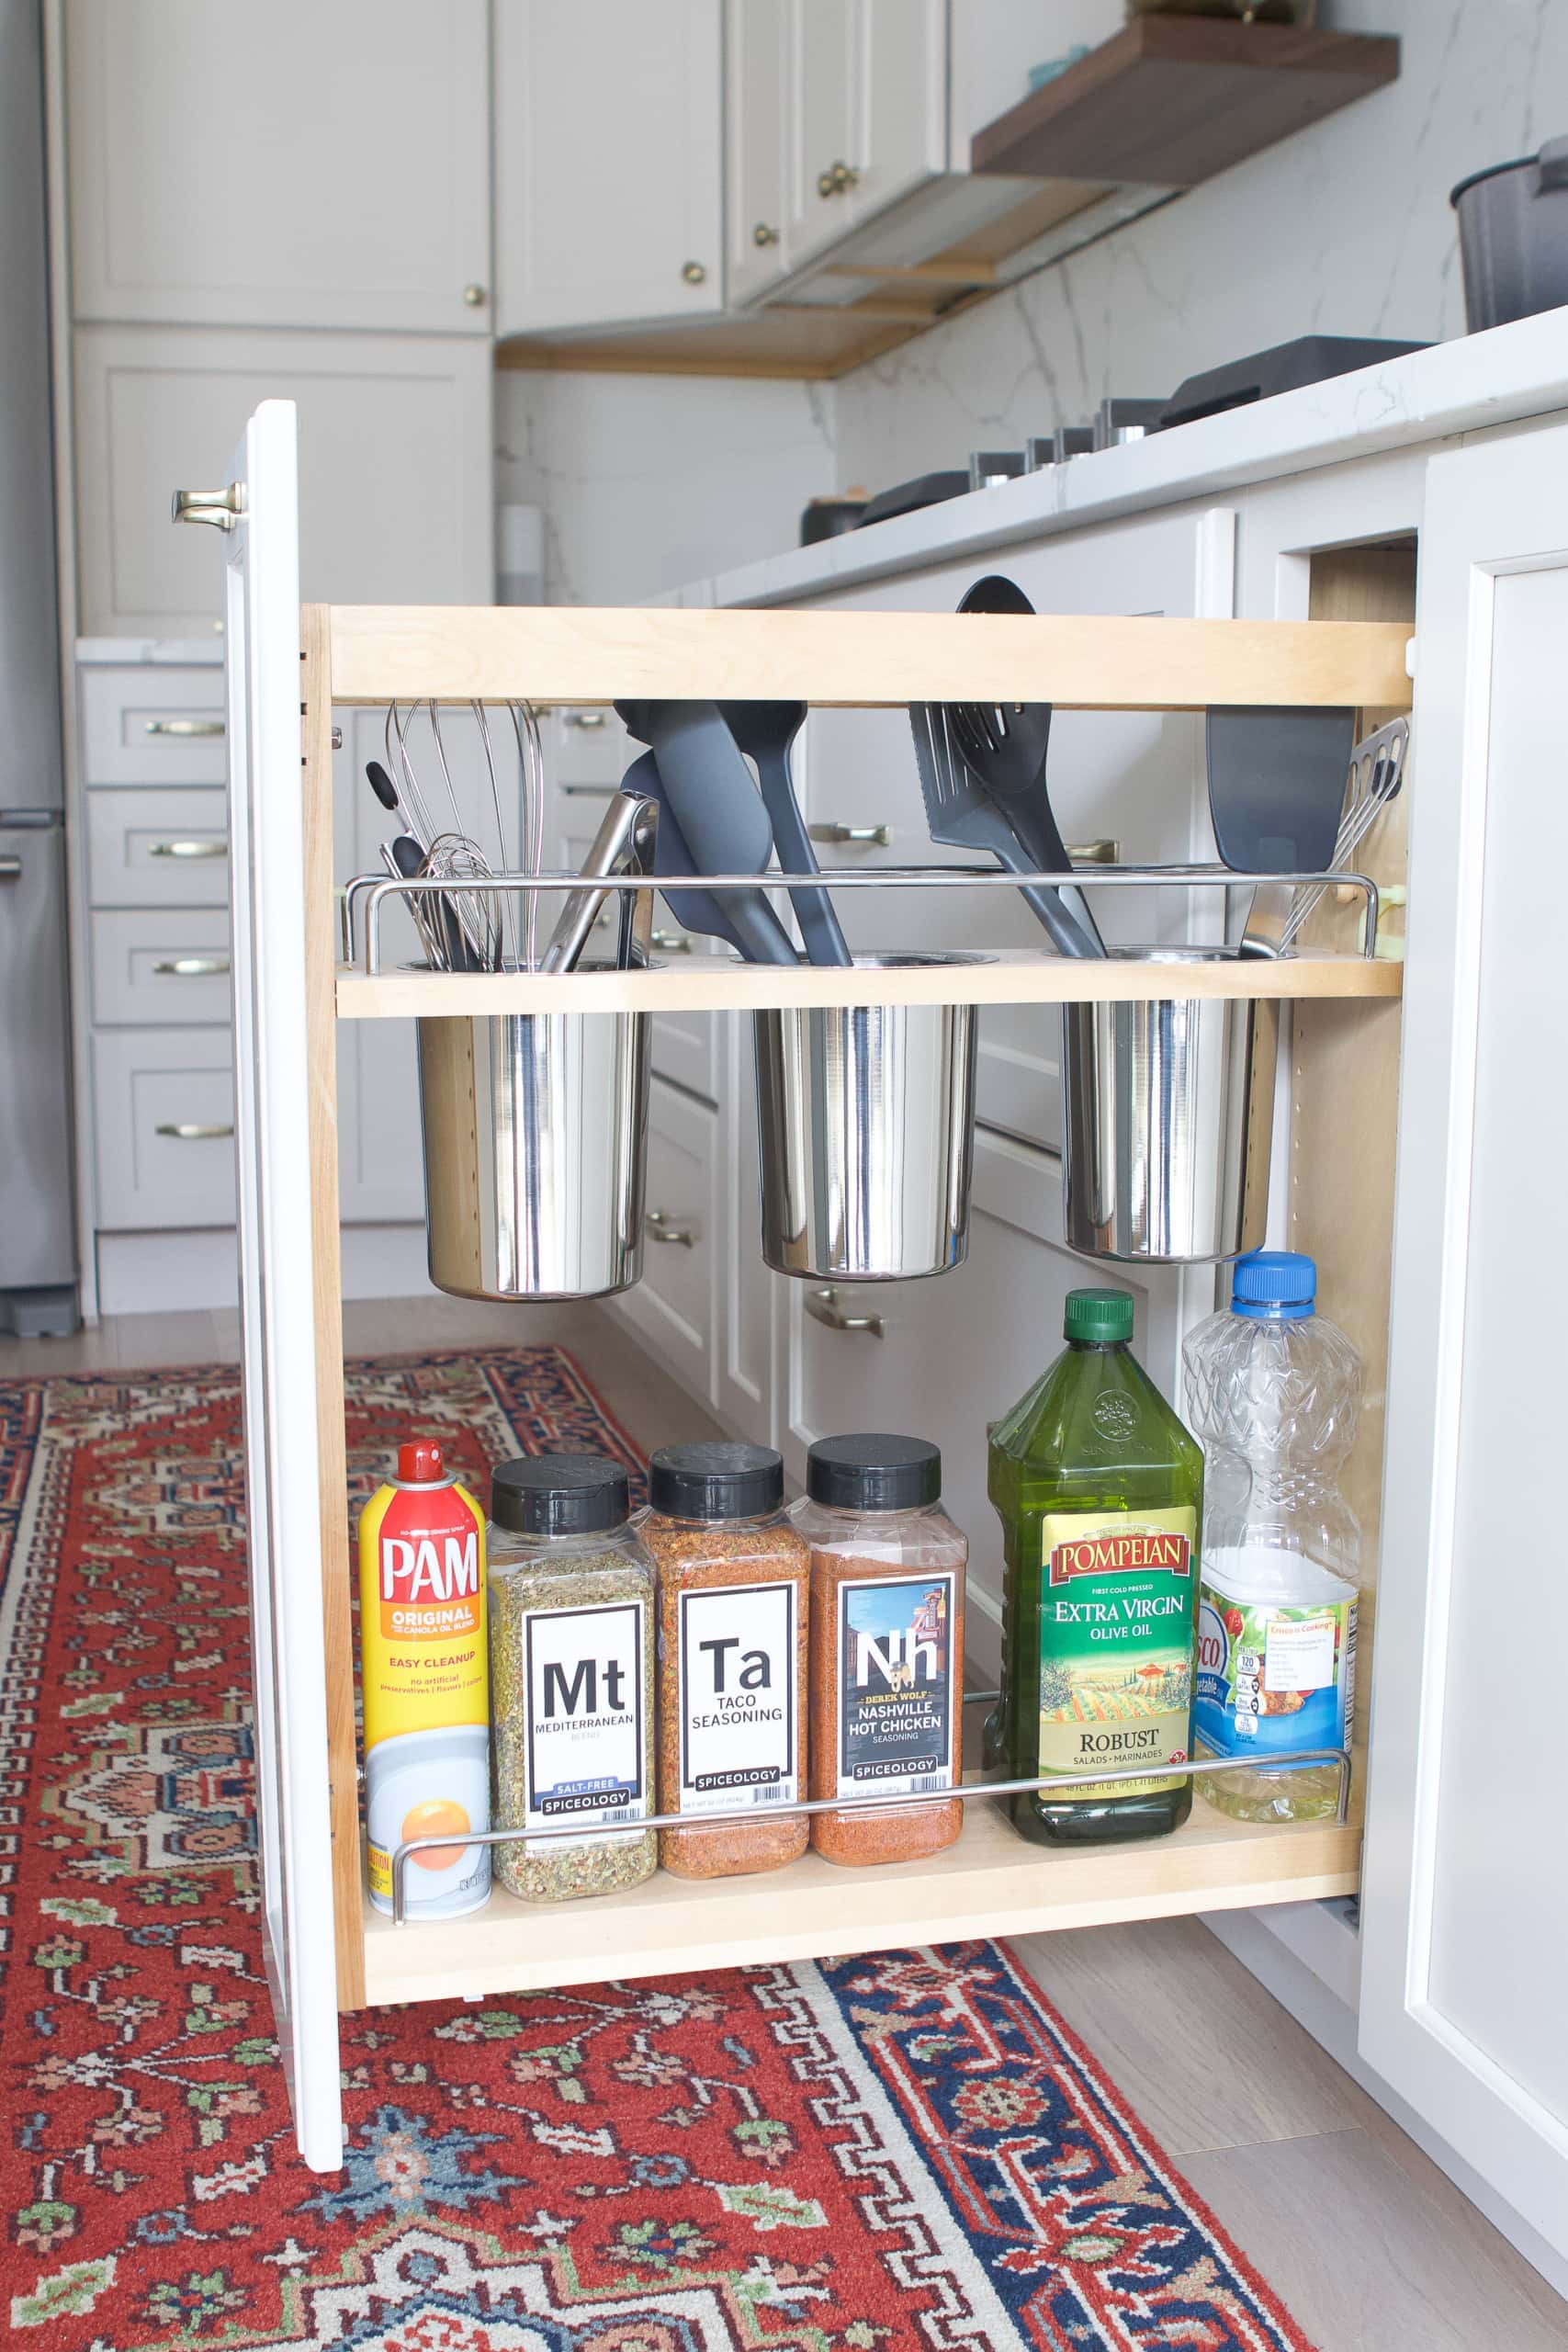 Tips to organize kitchen cabinets